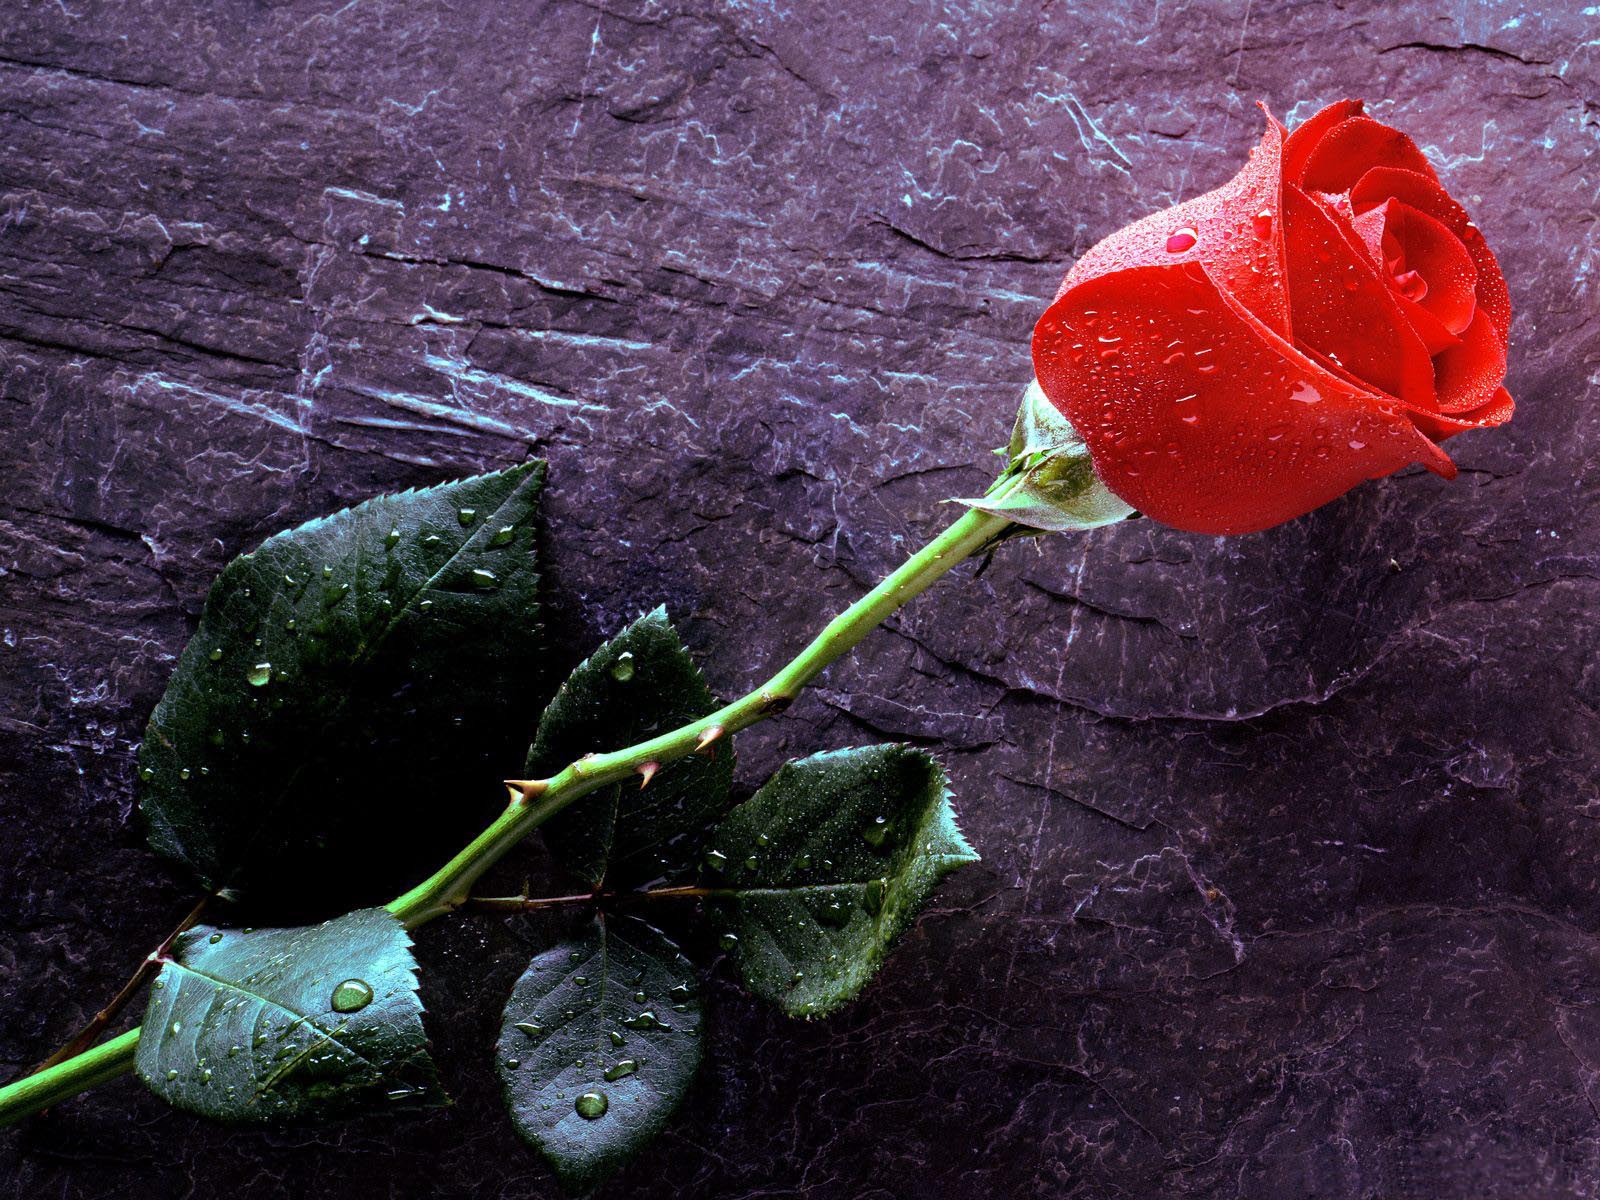 Beautiful wallpaper wtih a single rose with thorns and water